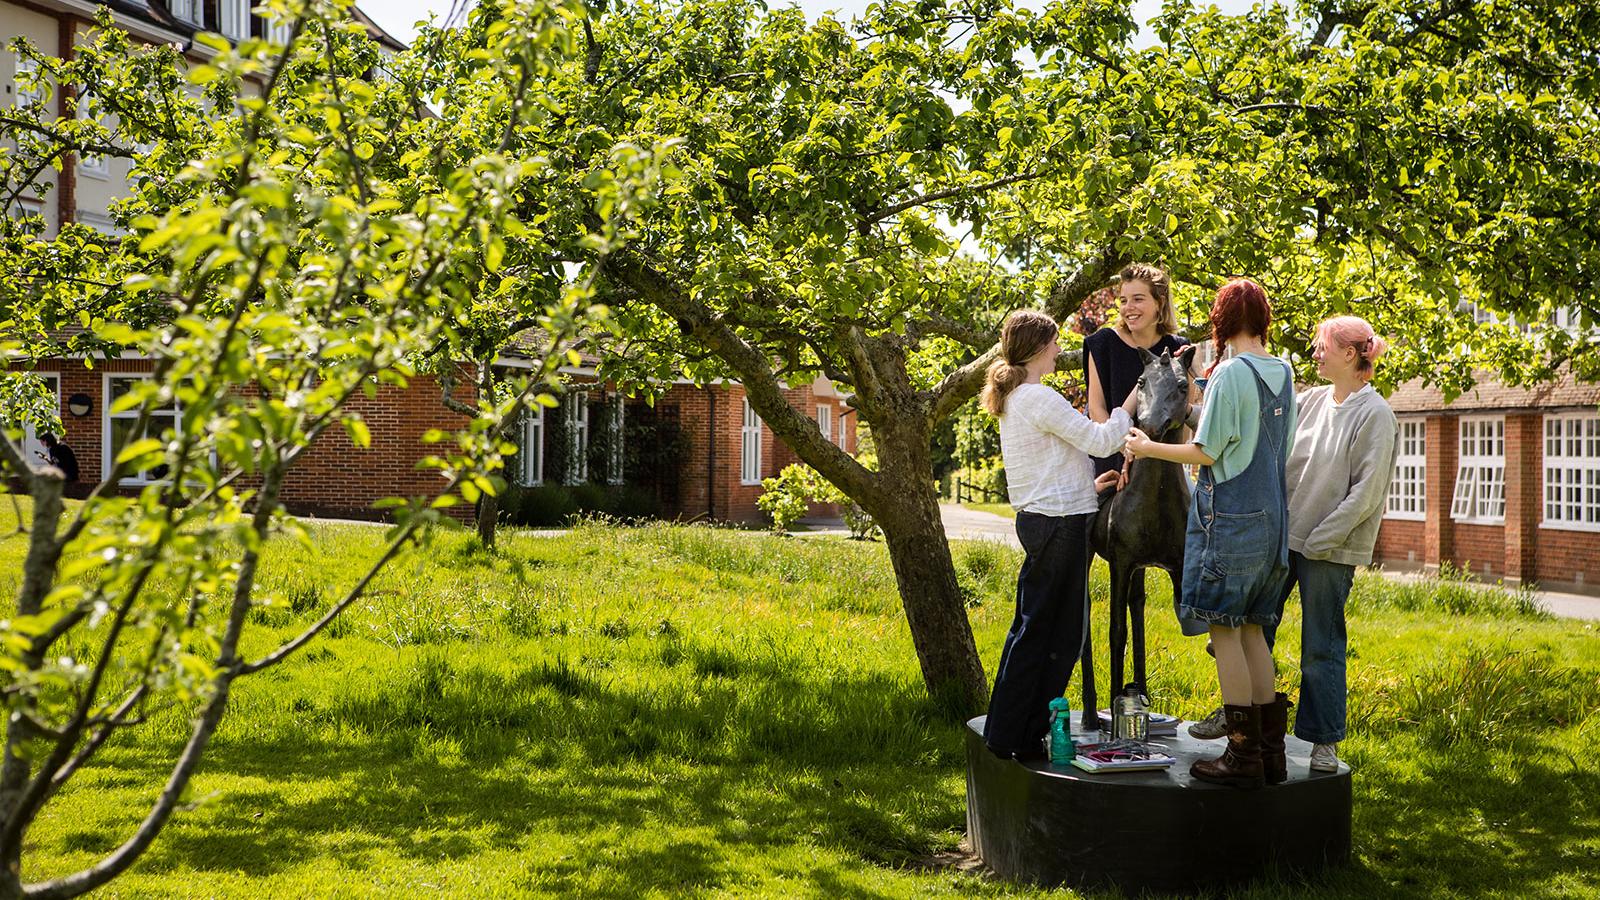 Students in the Orchard at Bedales Senior